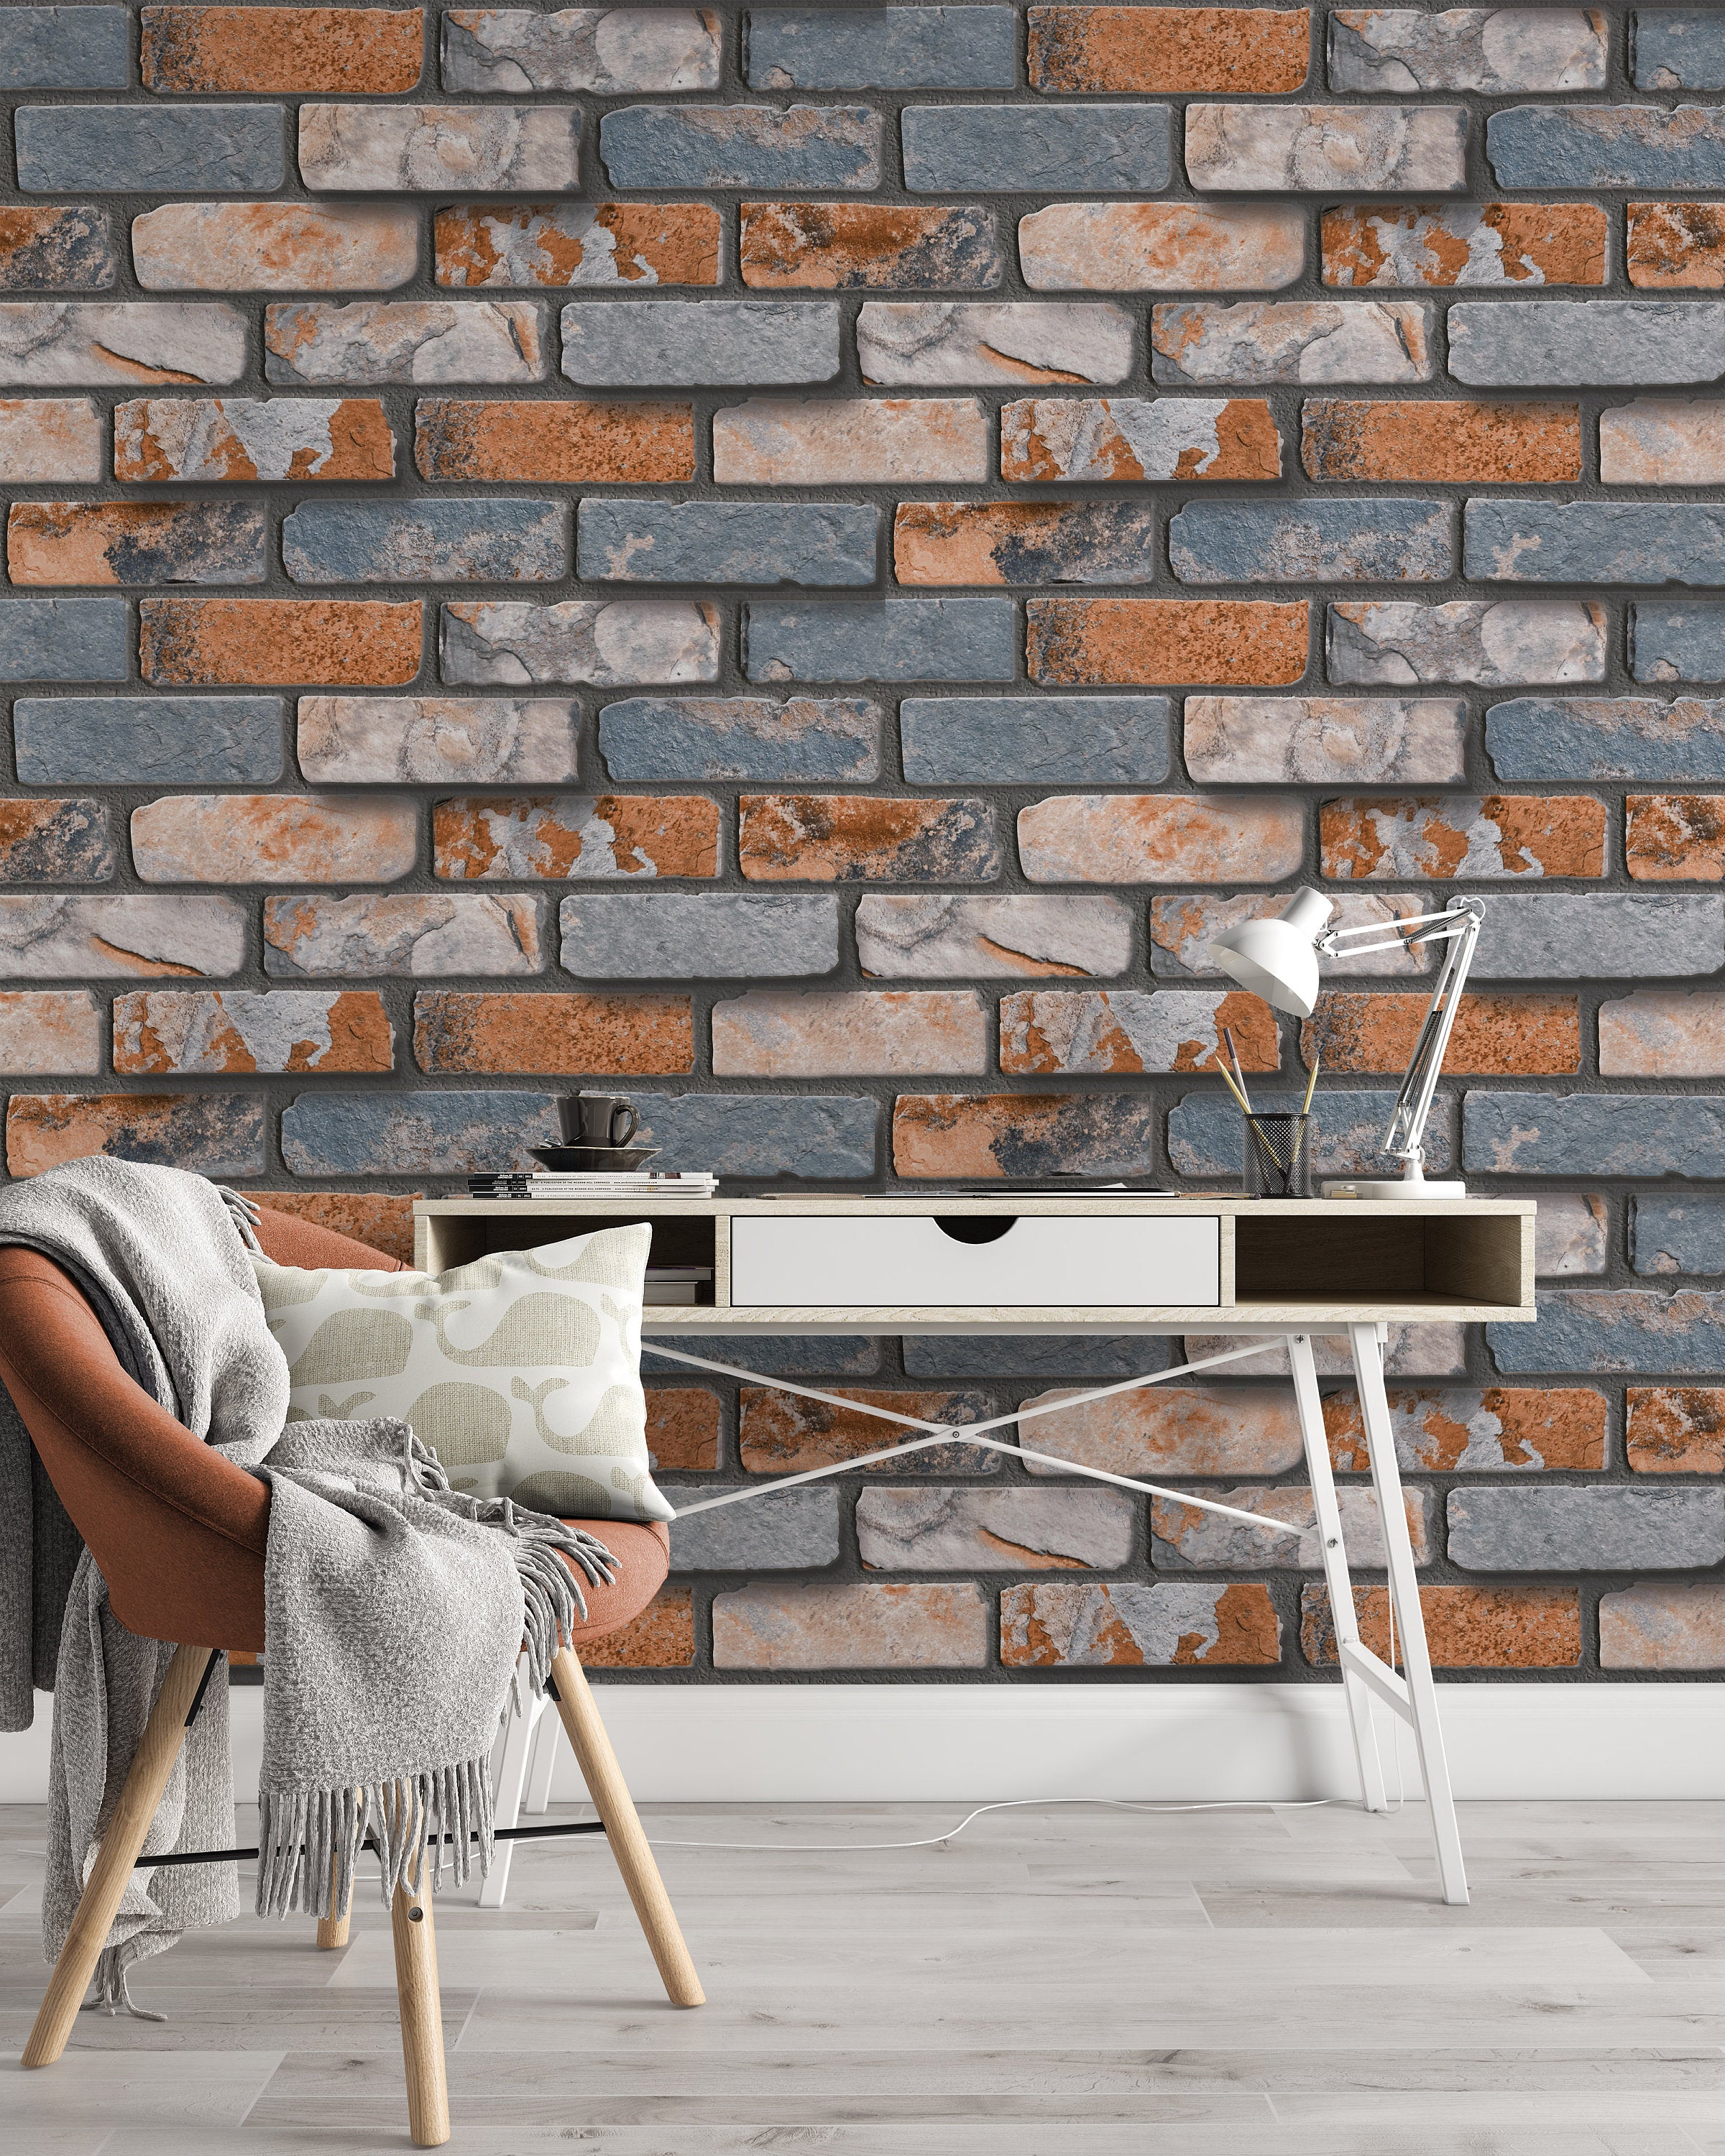 3D Stone Wall Elevation for Background Wallpaper Self Adhesive Peel and Stick Wall Sticker Wall Decoration Minimalistic Scandinavian Decor